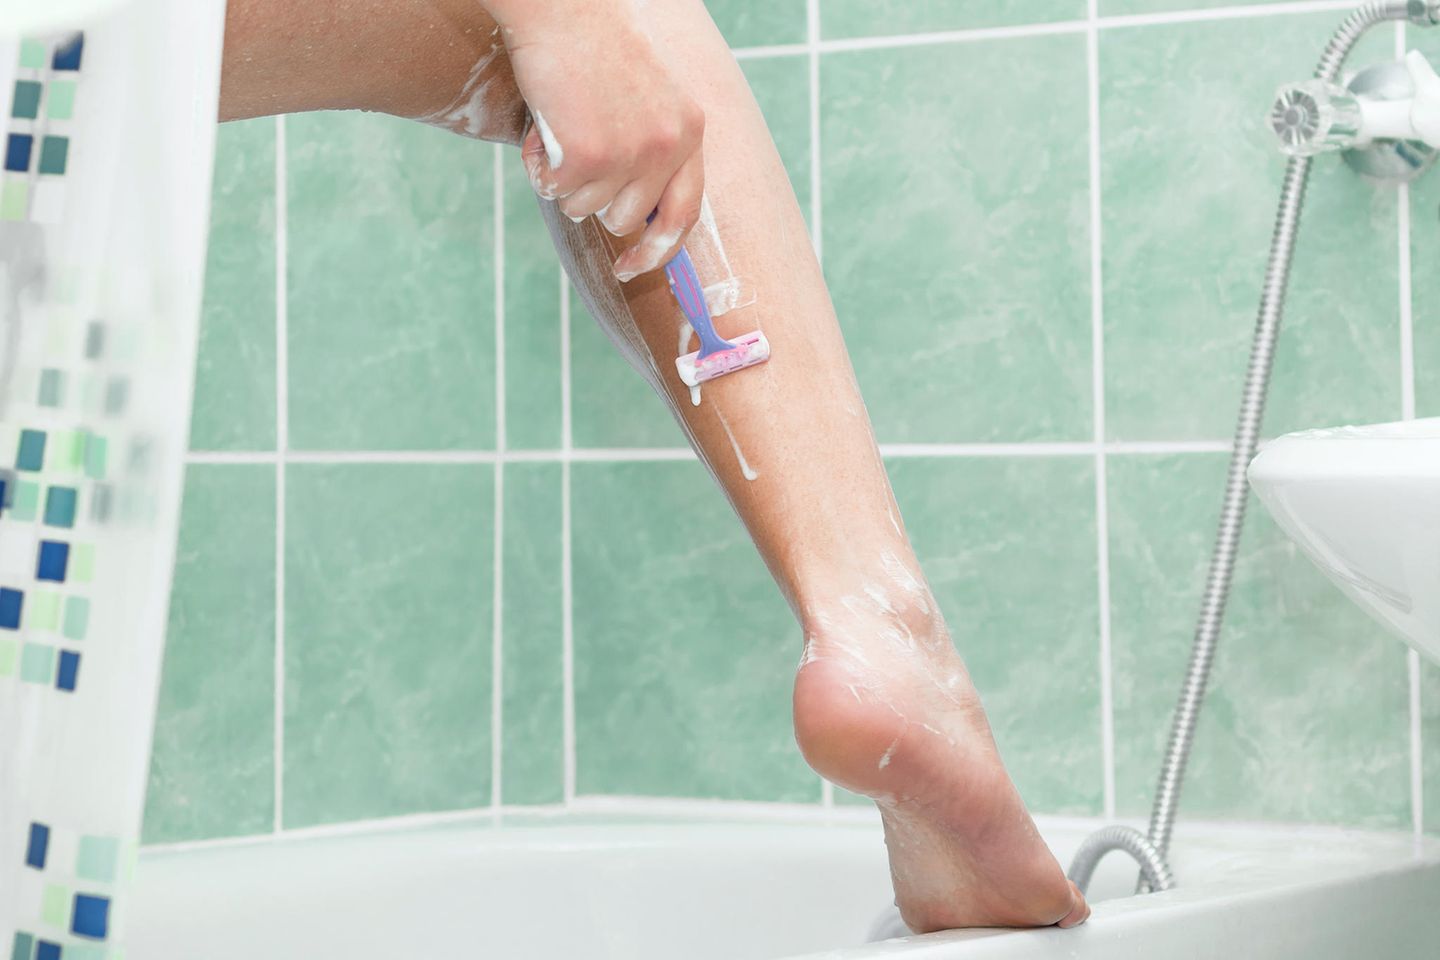 Expert warns: That's why we should all keep our hands off the razor!